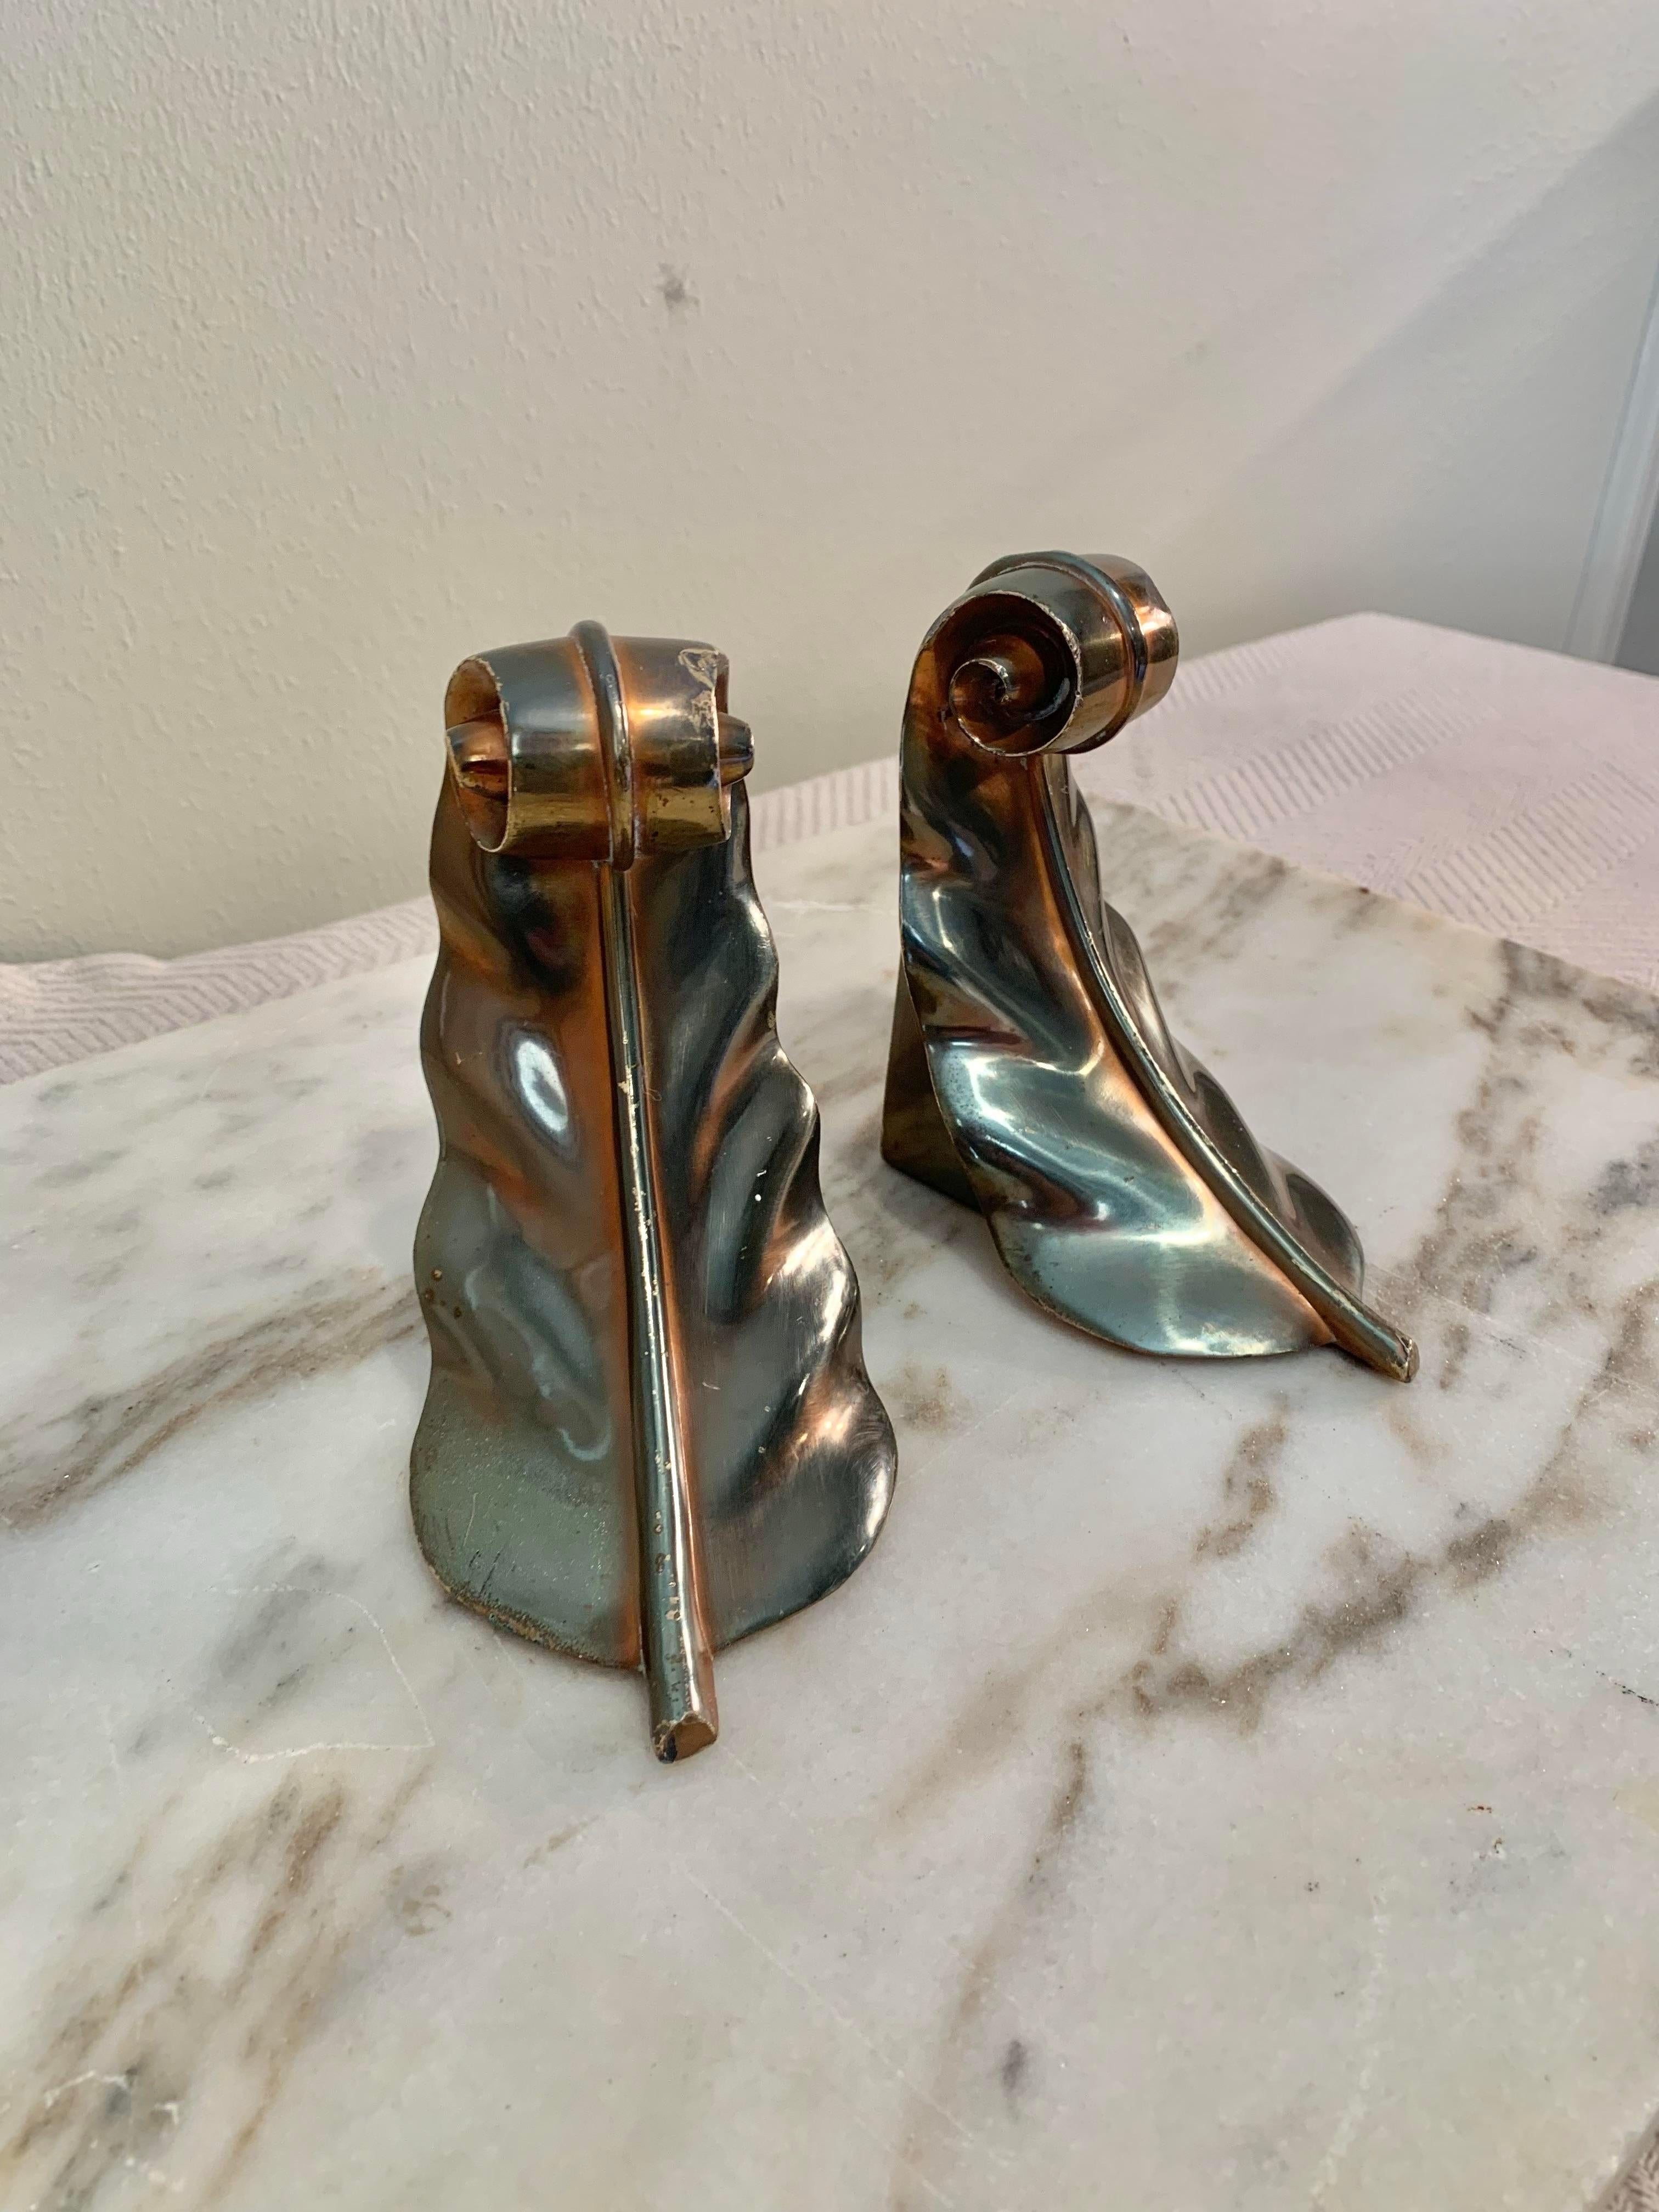 Solid and sturdy, this Pair of Mid Century Modern Aged Brass Acanthus Leaf Scroll Bookends would be a beautiful addition to your home office or library. The base off each bookend is covered in felt to protect the furniture they are placed on. Given